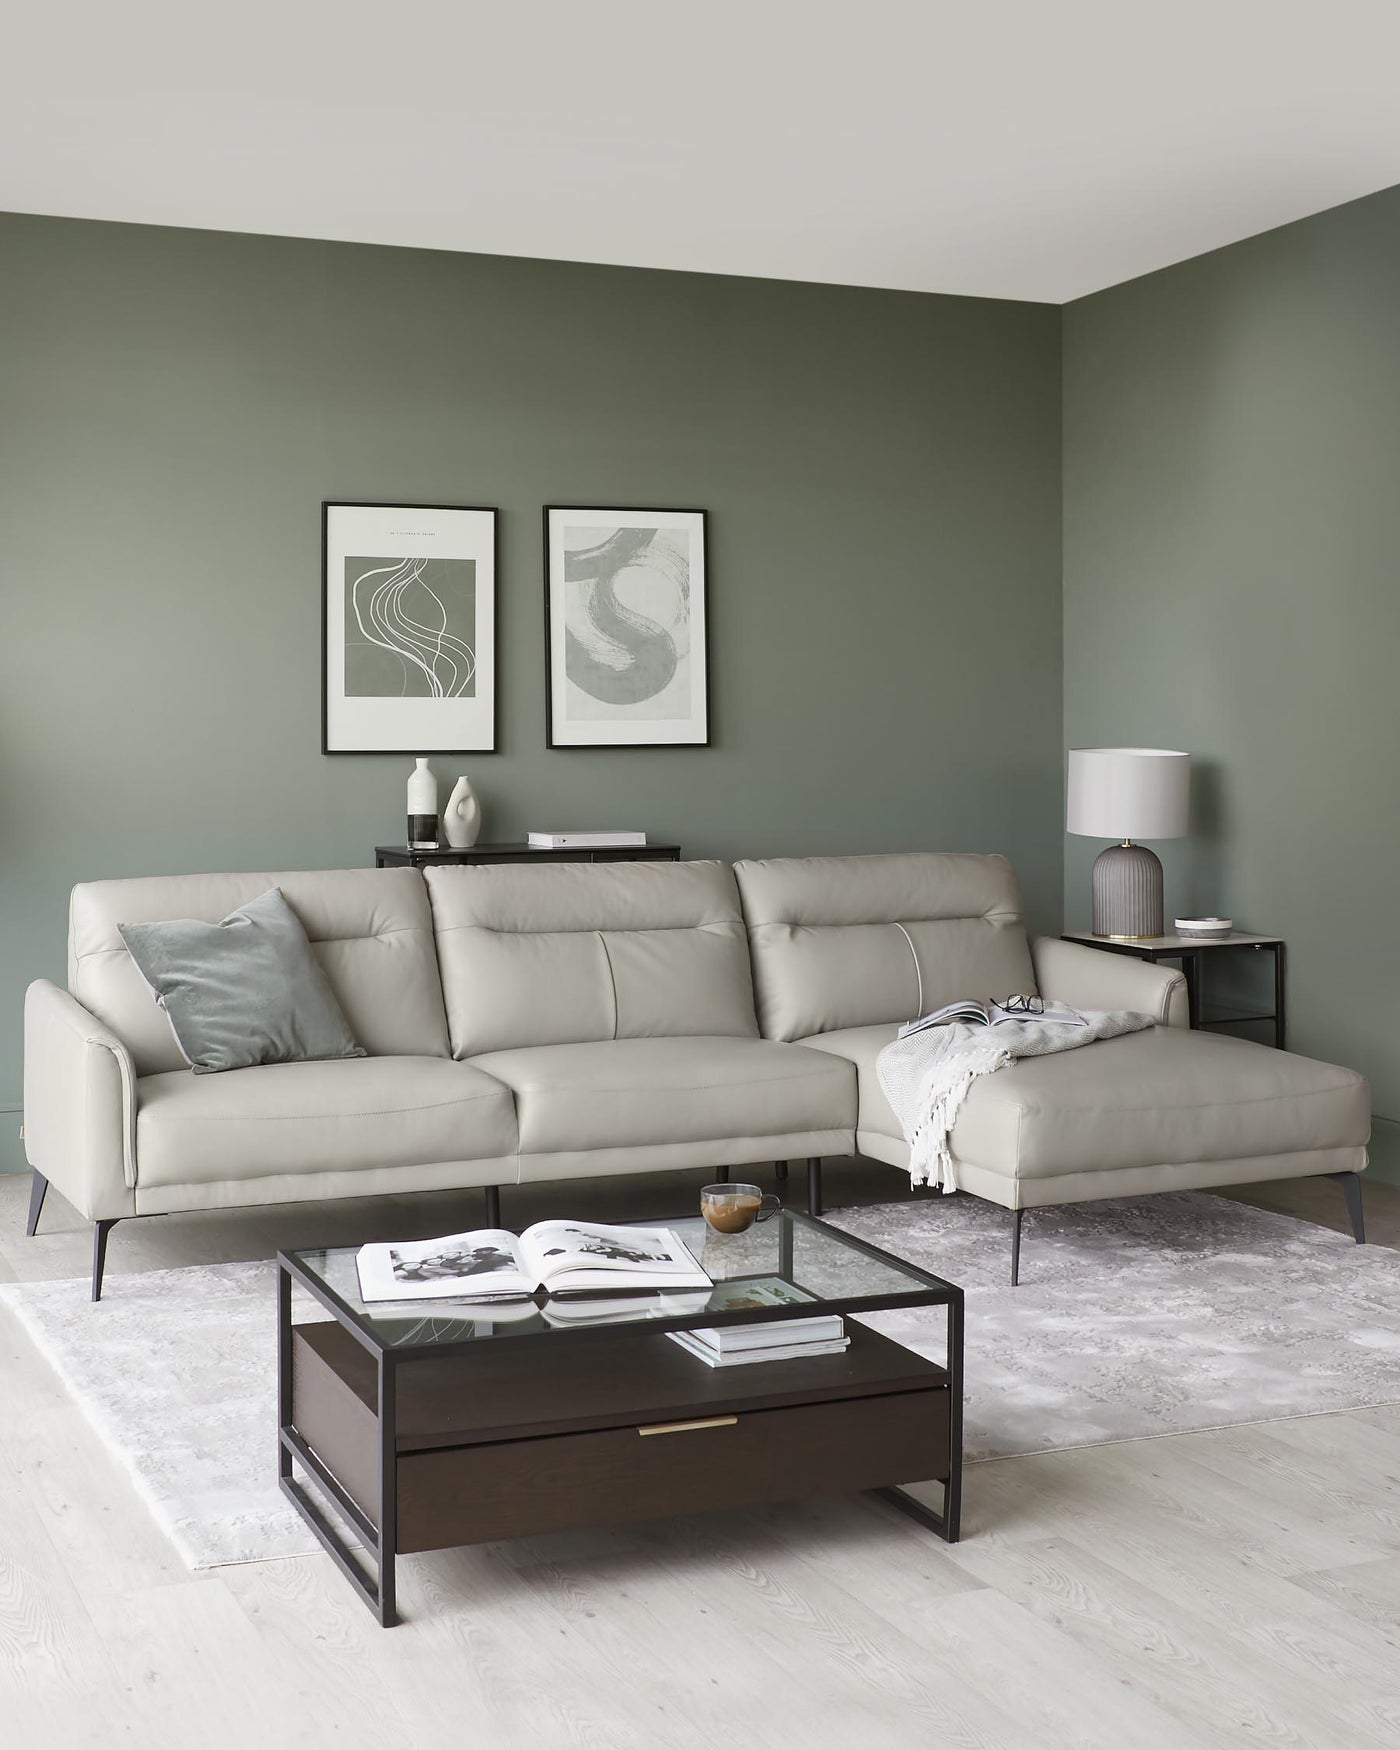 A contemporary light grey sectional sofa with a chaise lounge on its right end, featuring minimalist metal legs, complemented by a dark wood coffee table with a glass top and metal frame, resting on a soft textured area rug. A sleek, dark-finished side table with a simple table lamp is also present beside the sofa.